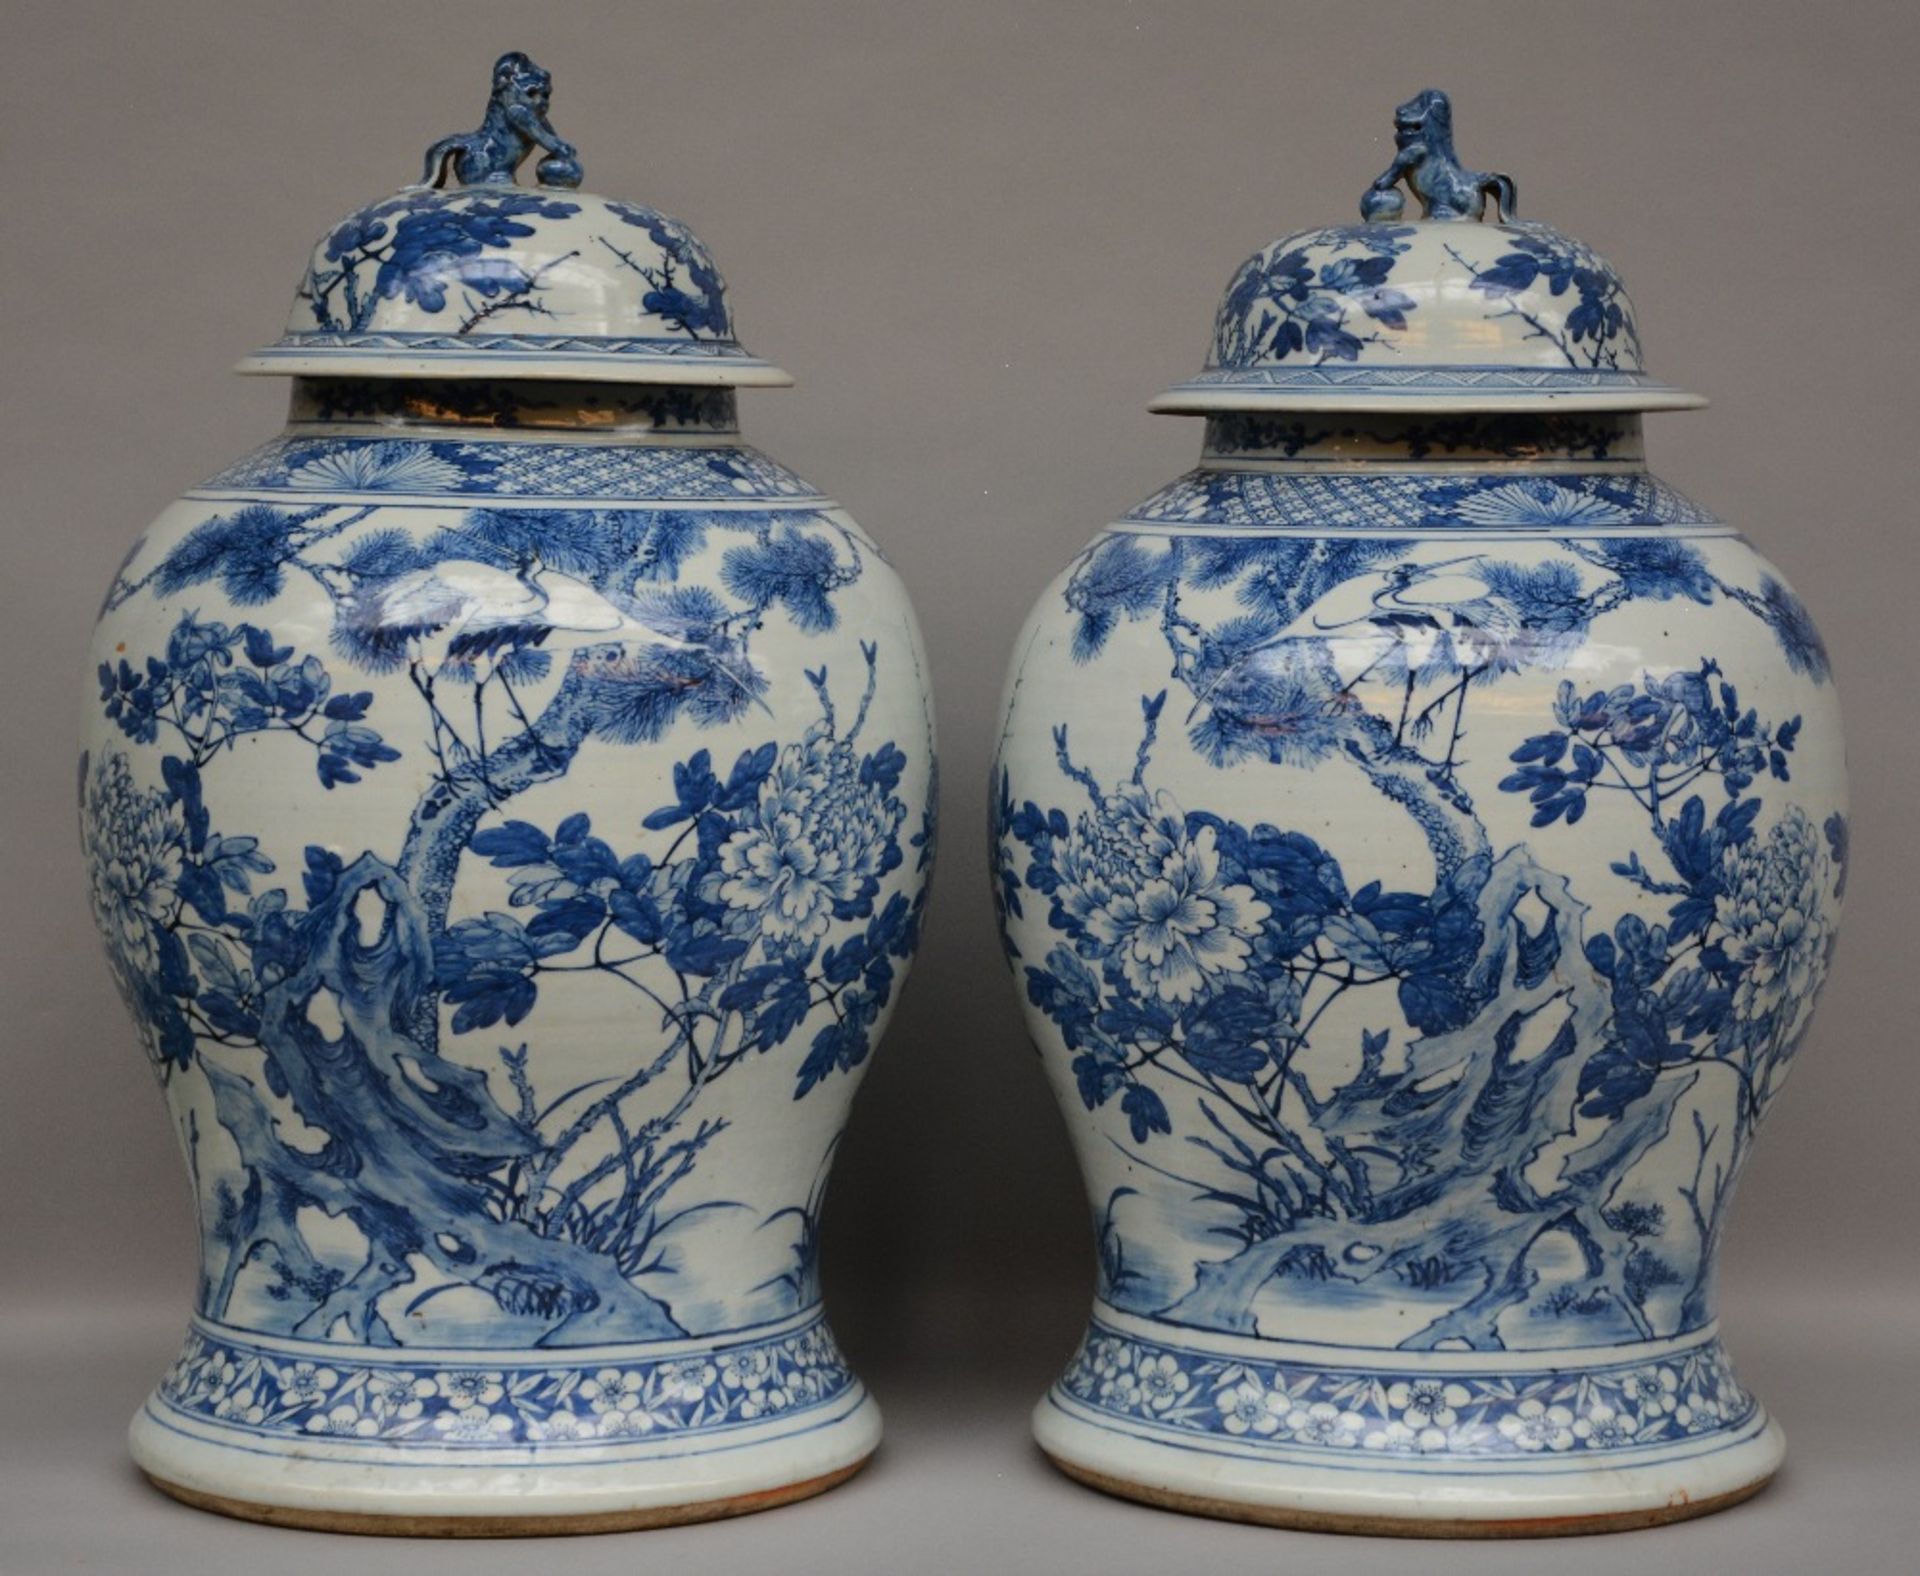 A pair of impressive Chinese blue and white vases with cover, decorated with the image of birds on a